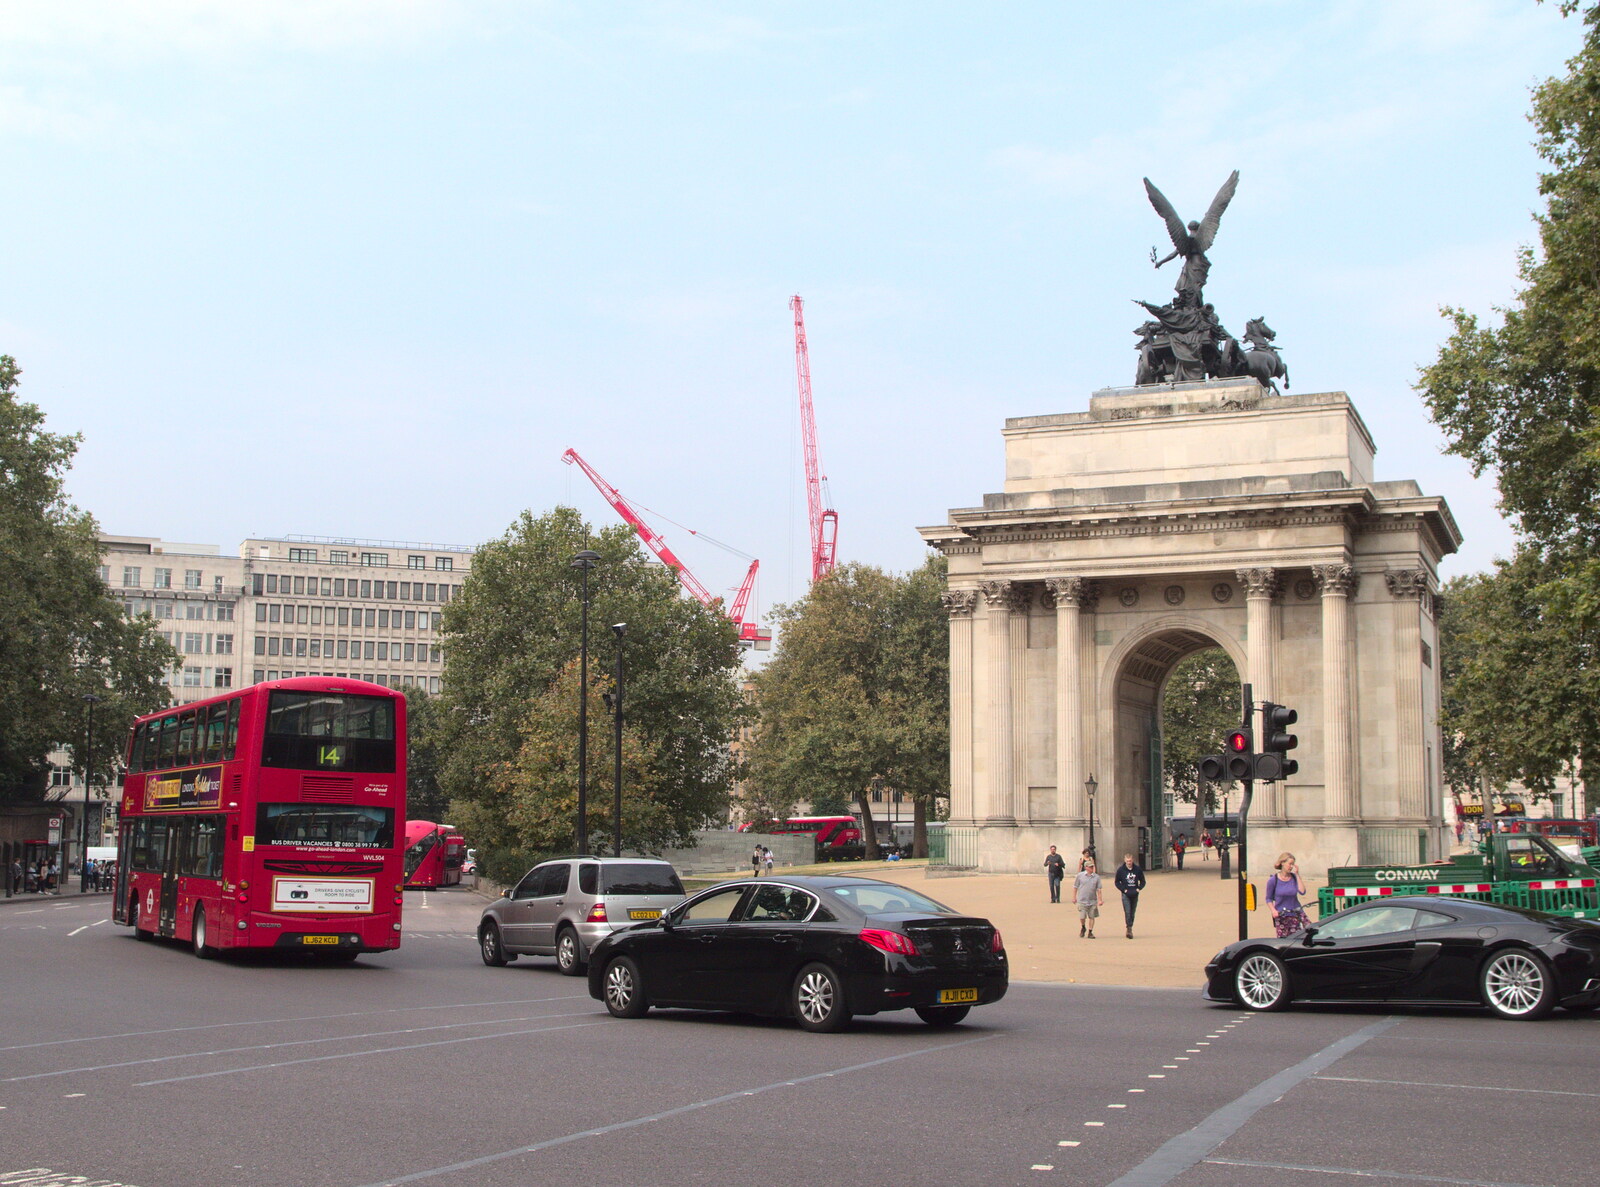 The Wellington Arch from A Trip to the New Office, Paddington, London - 18th August 2016